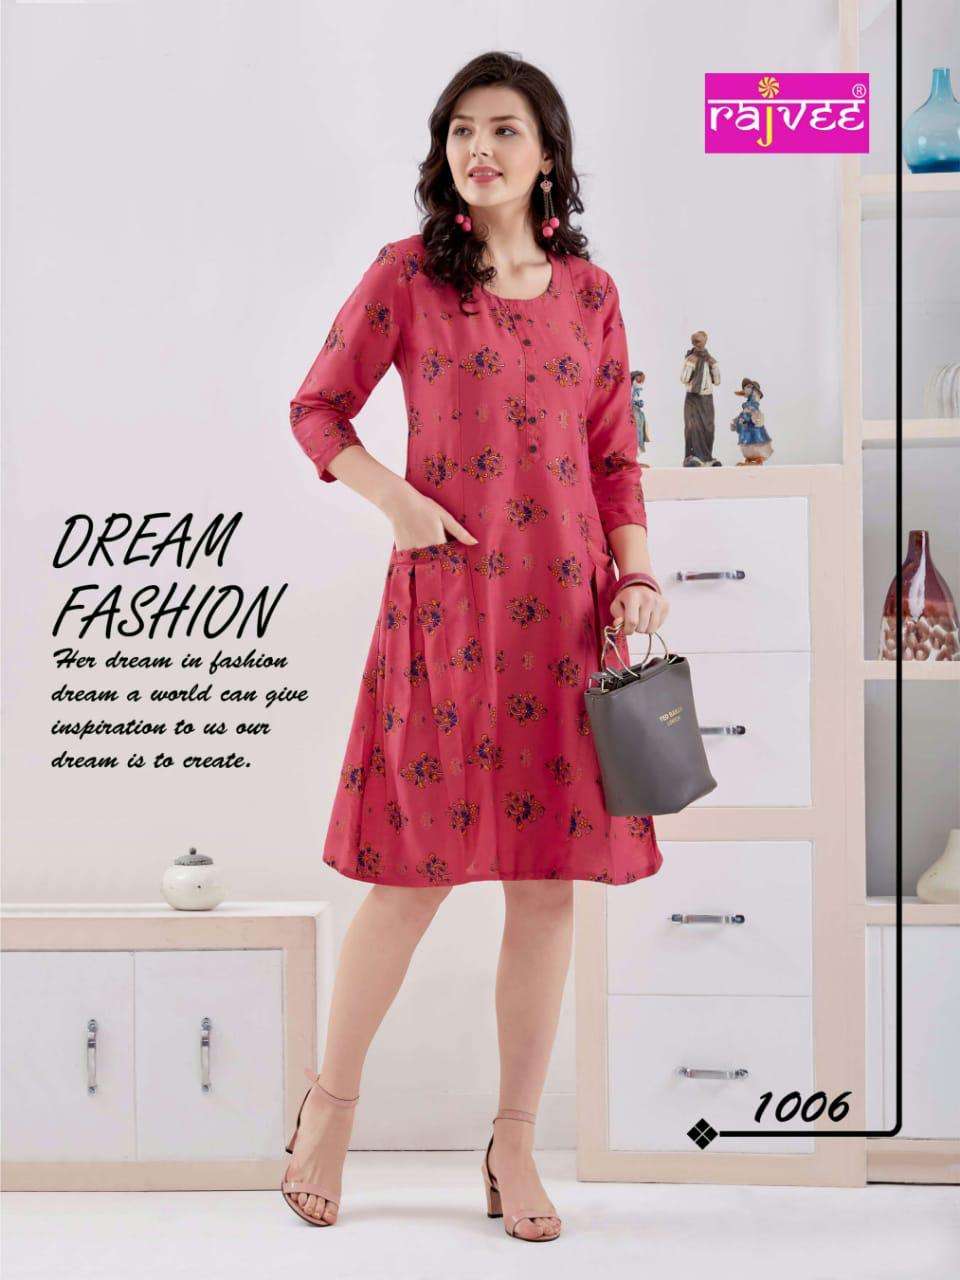 ICON PRINT BY RAJVEE 1001 TO 1008 SERIES BEAUTIFUL STYLISH FANCY COLORFUL CASUAL WEAR & ETHNIC WEAR RAYON CROSS PRINTED KURTIS AT WHOLESALE PRICE